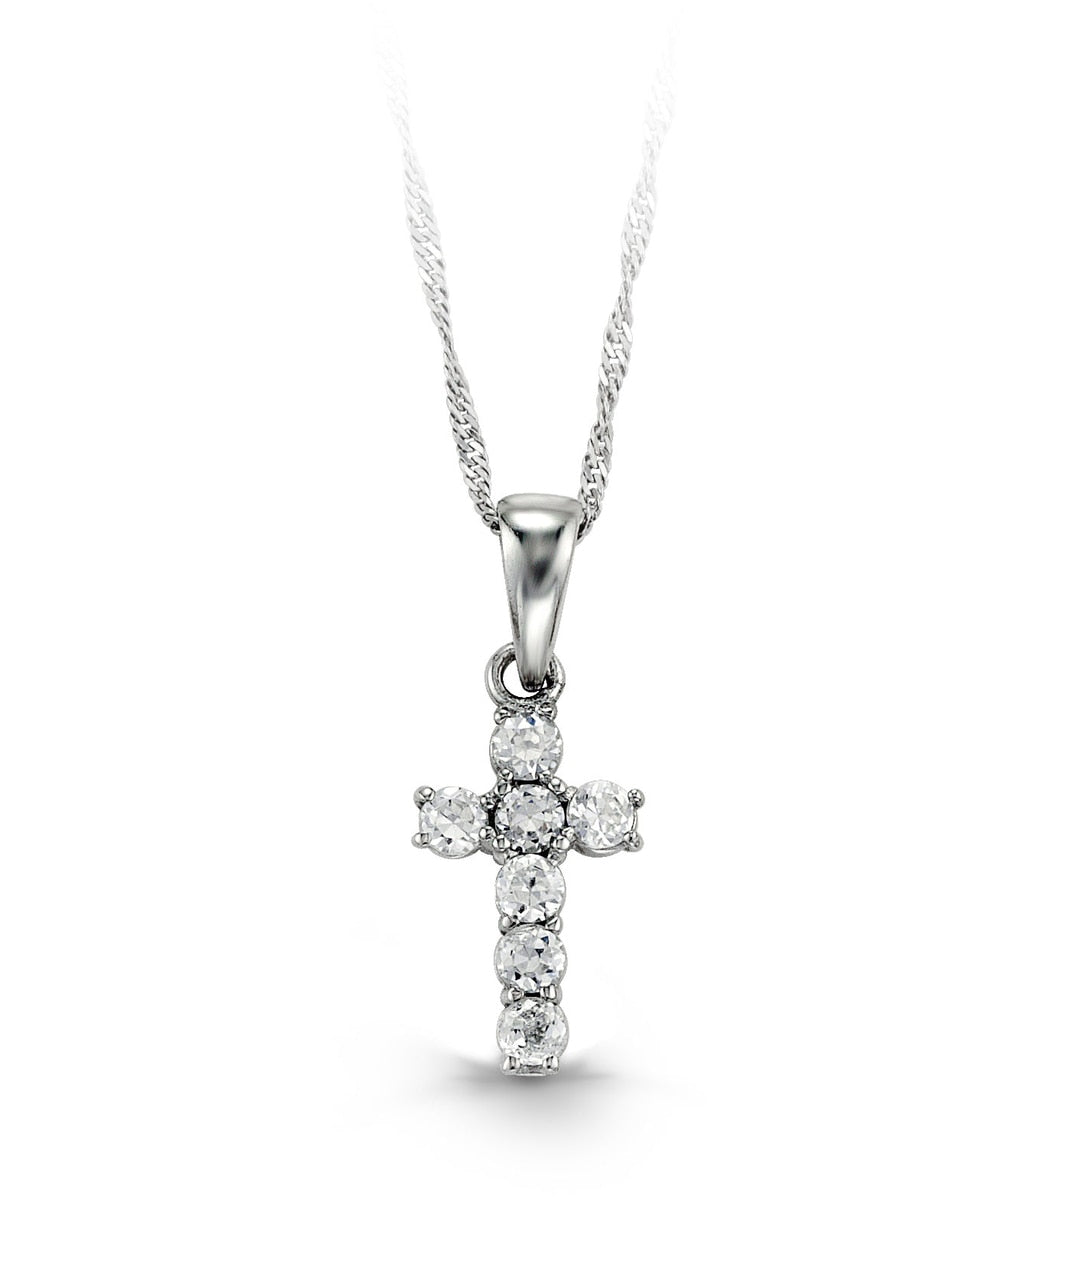 Baby CZ Cross Necklace in White Gold 